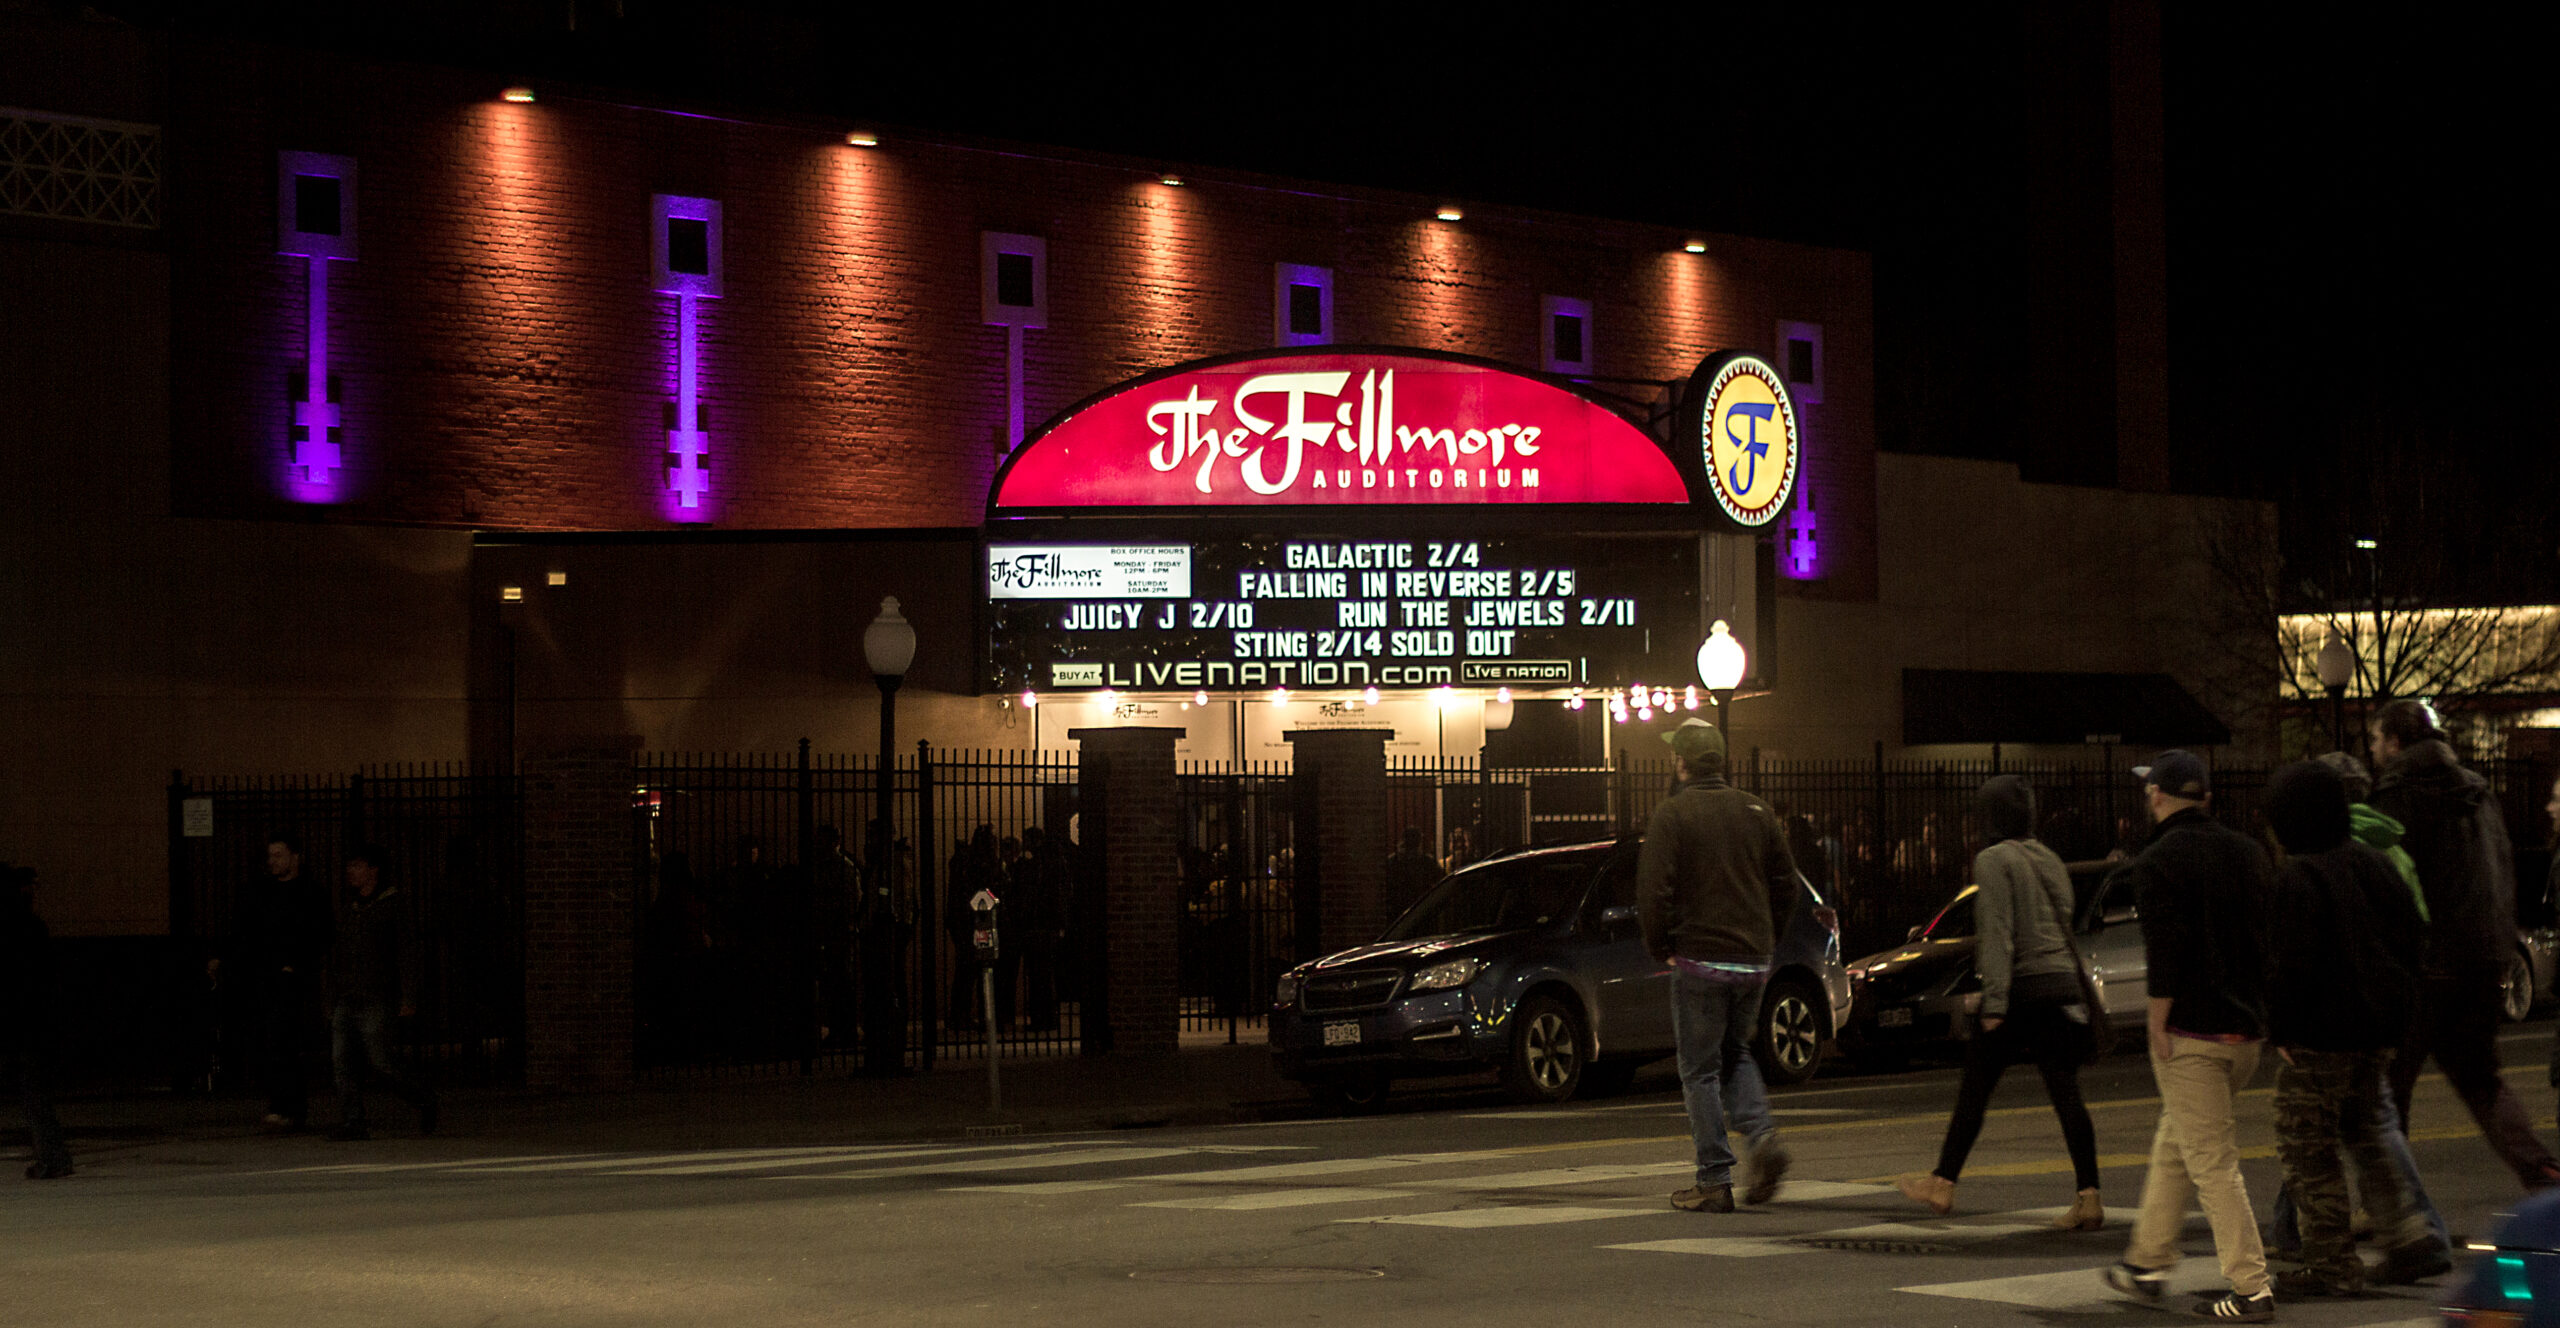 The Fillmore Auditorium in downtown Denver, Colorado. Photo taken on 02/04/17. Photo by: Matthew McGuire